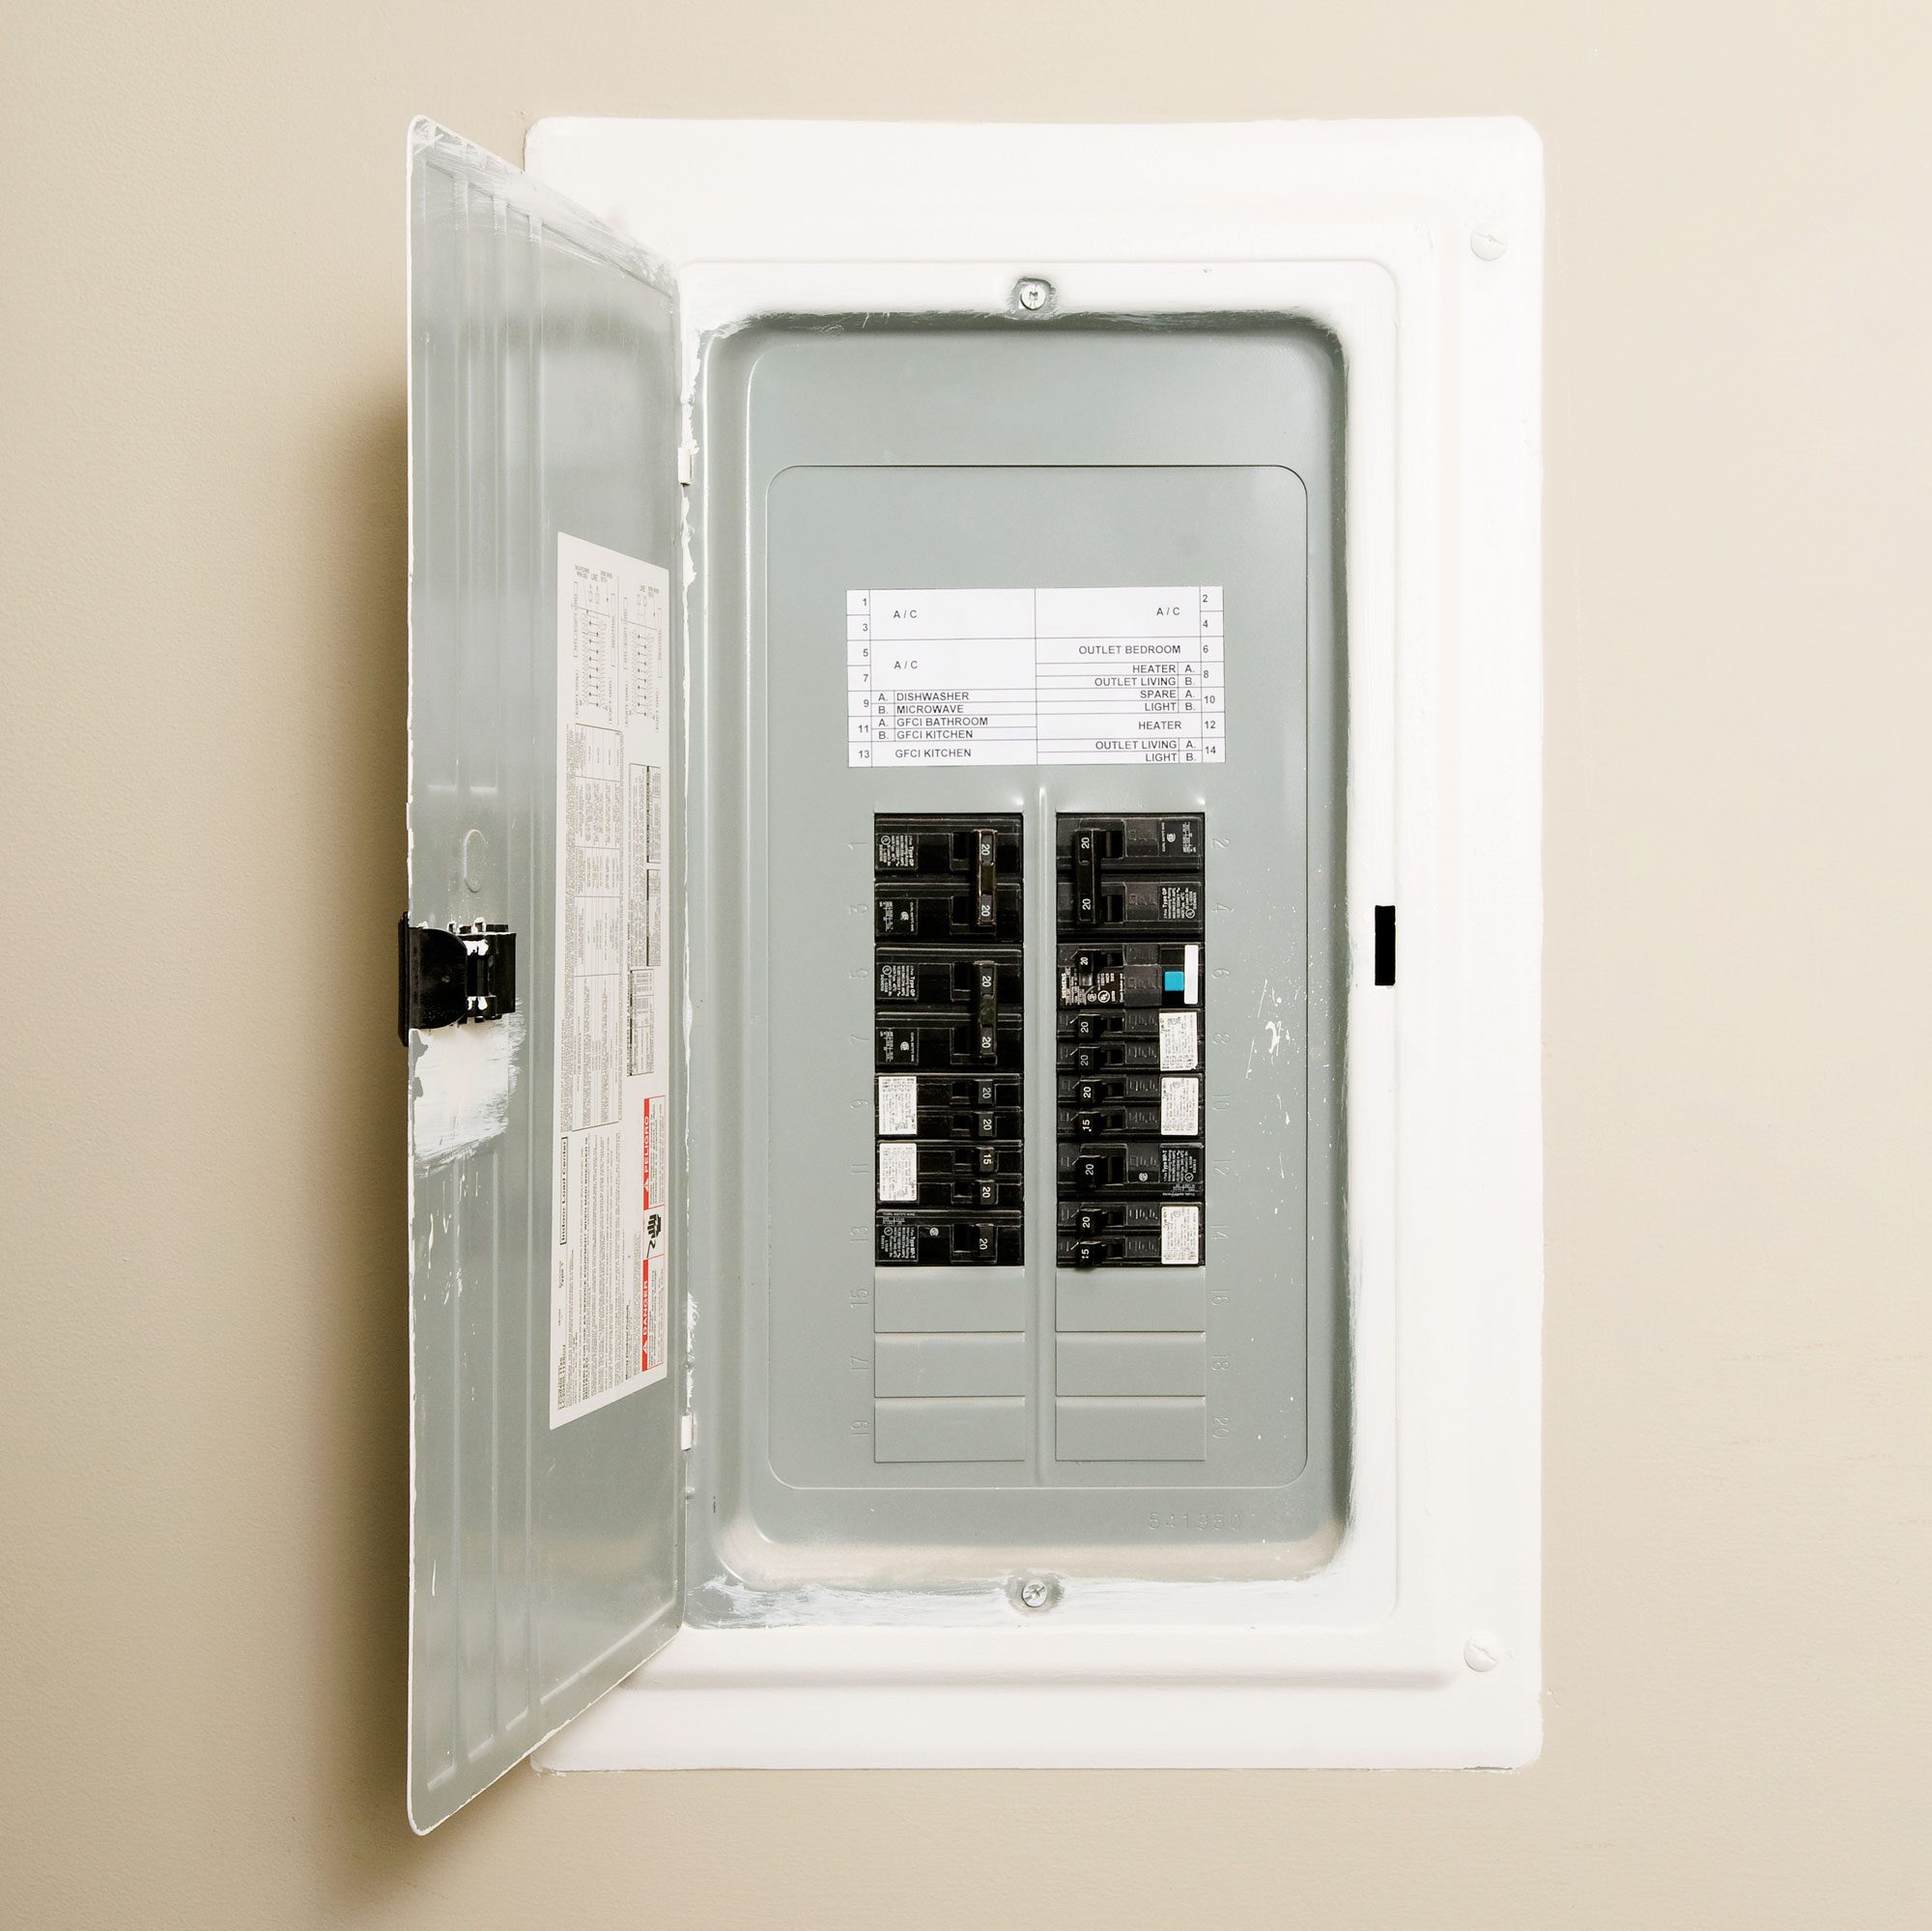 Electrical Panel Replacement - Which Brand is Right for You?